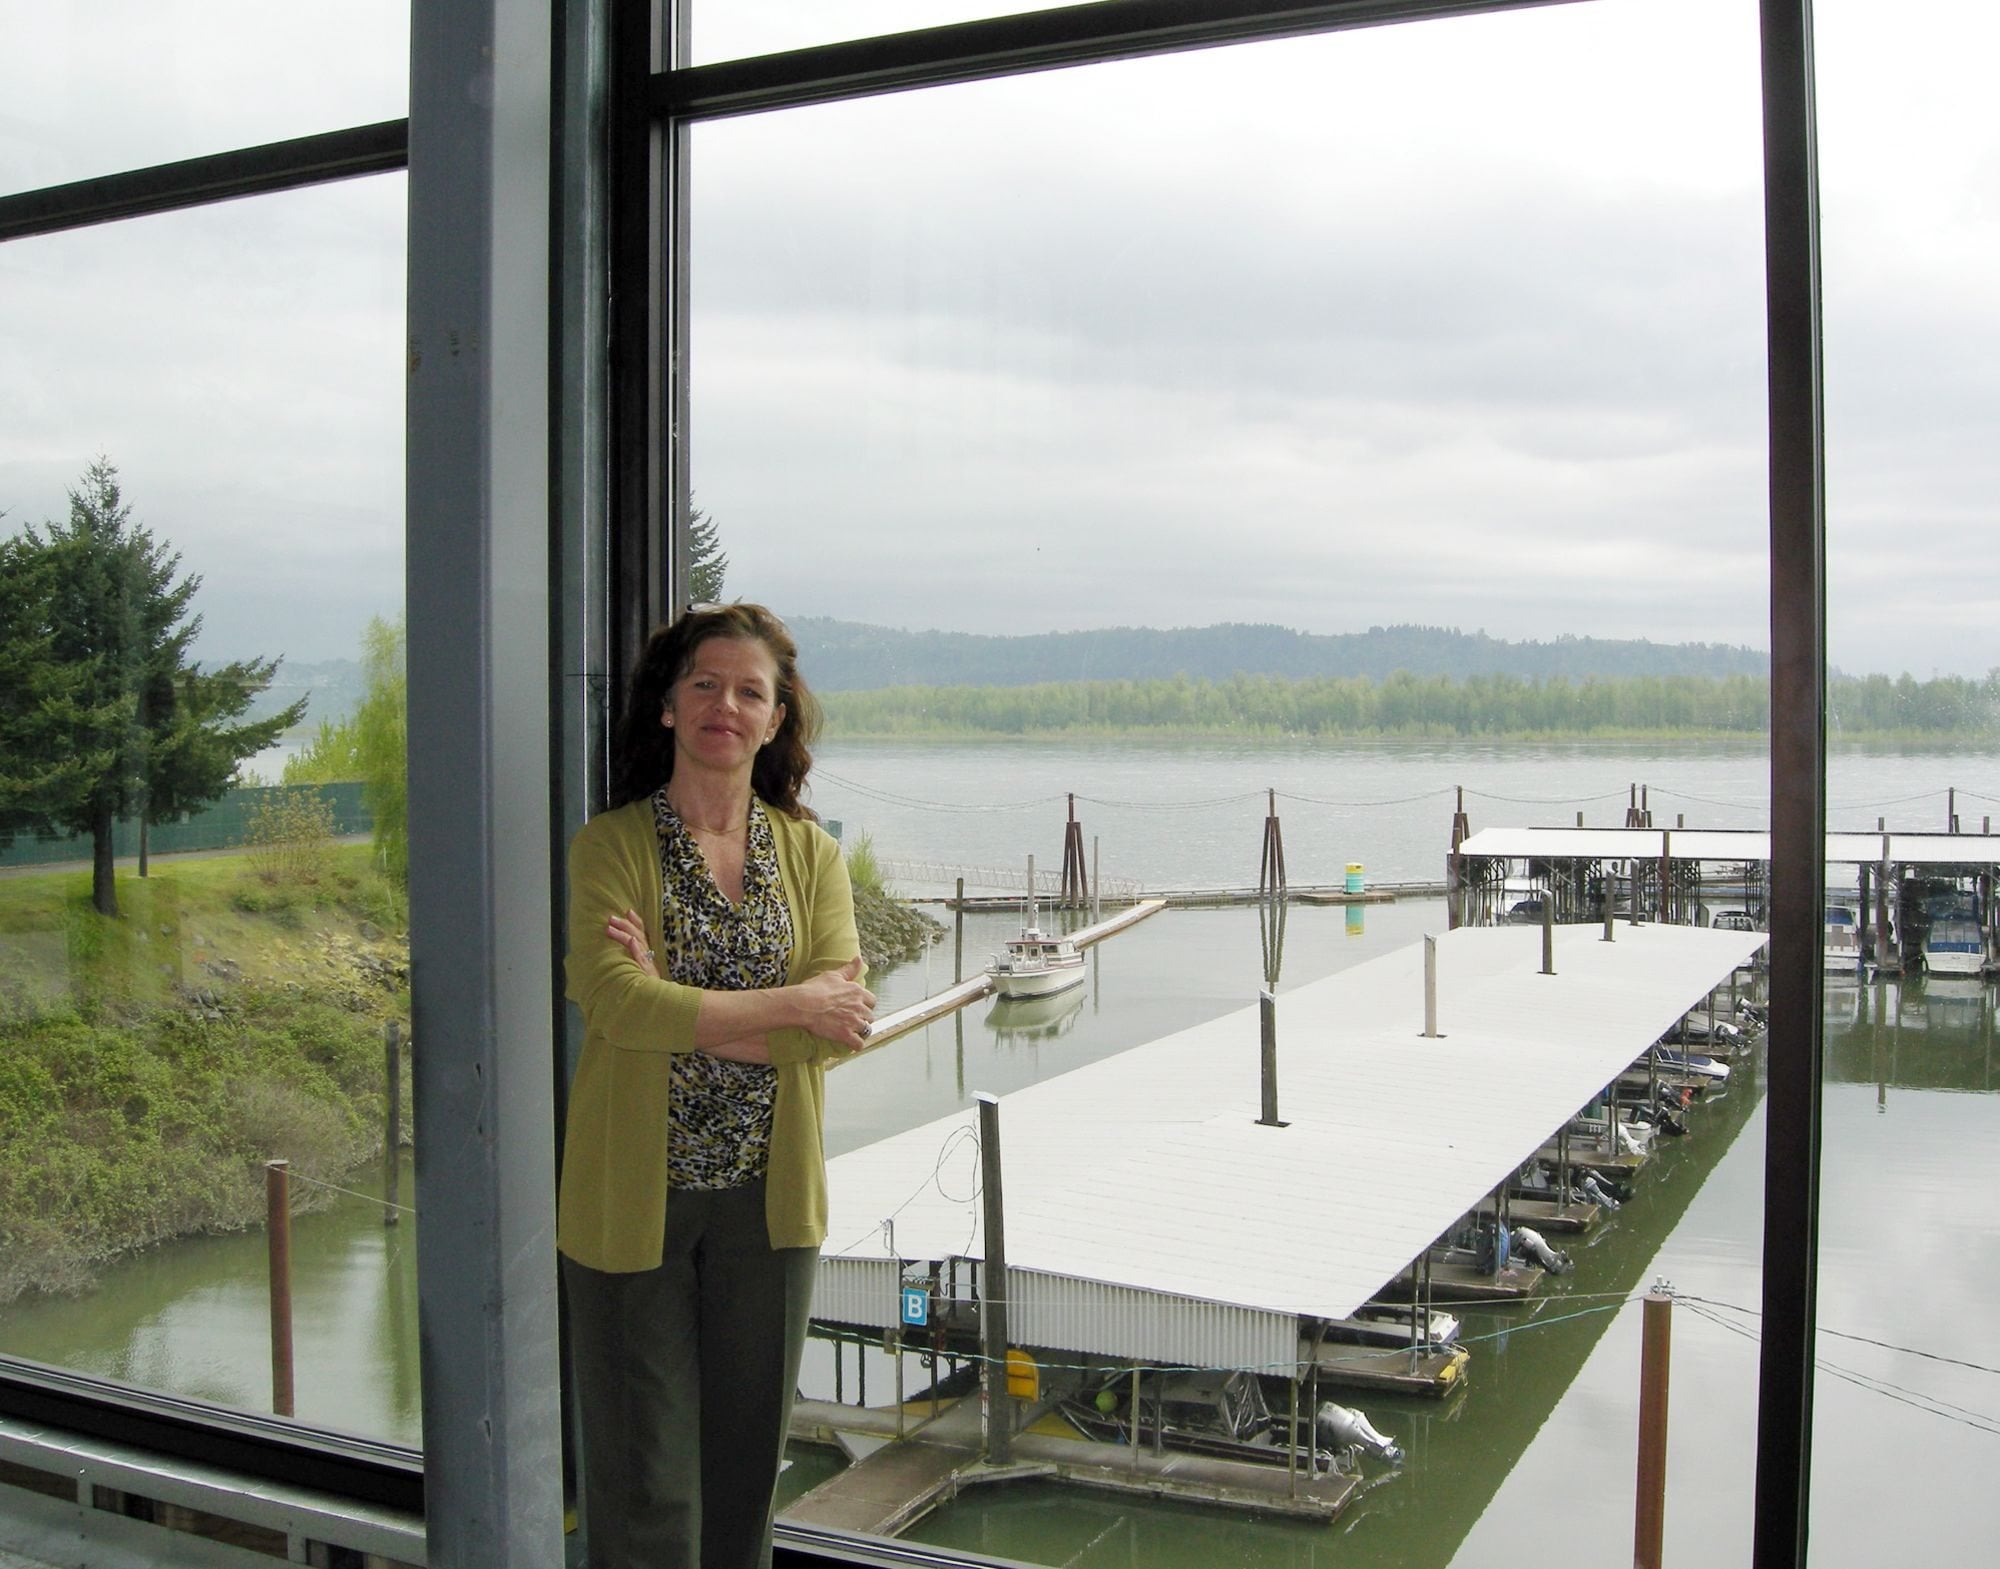 Kimberly Sherertz, widow of the late Vancouver businessman William Sherertz, stands beside the unfinished Columbia River-front restaurant that her husband had planned to open this summer as The Black Pearl, a replacement for the torn-down Parker House Restaurant overlooking the marina at the Port of Camas-Washougal.